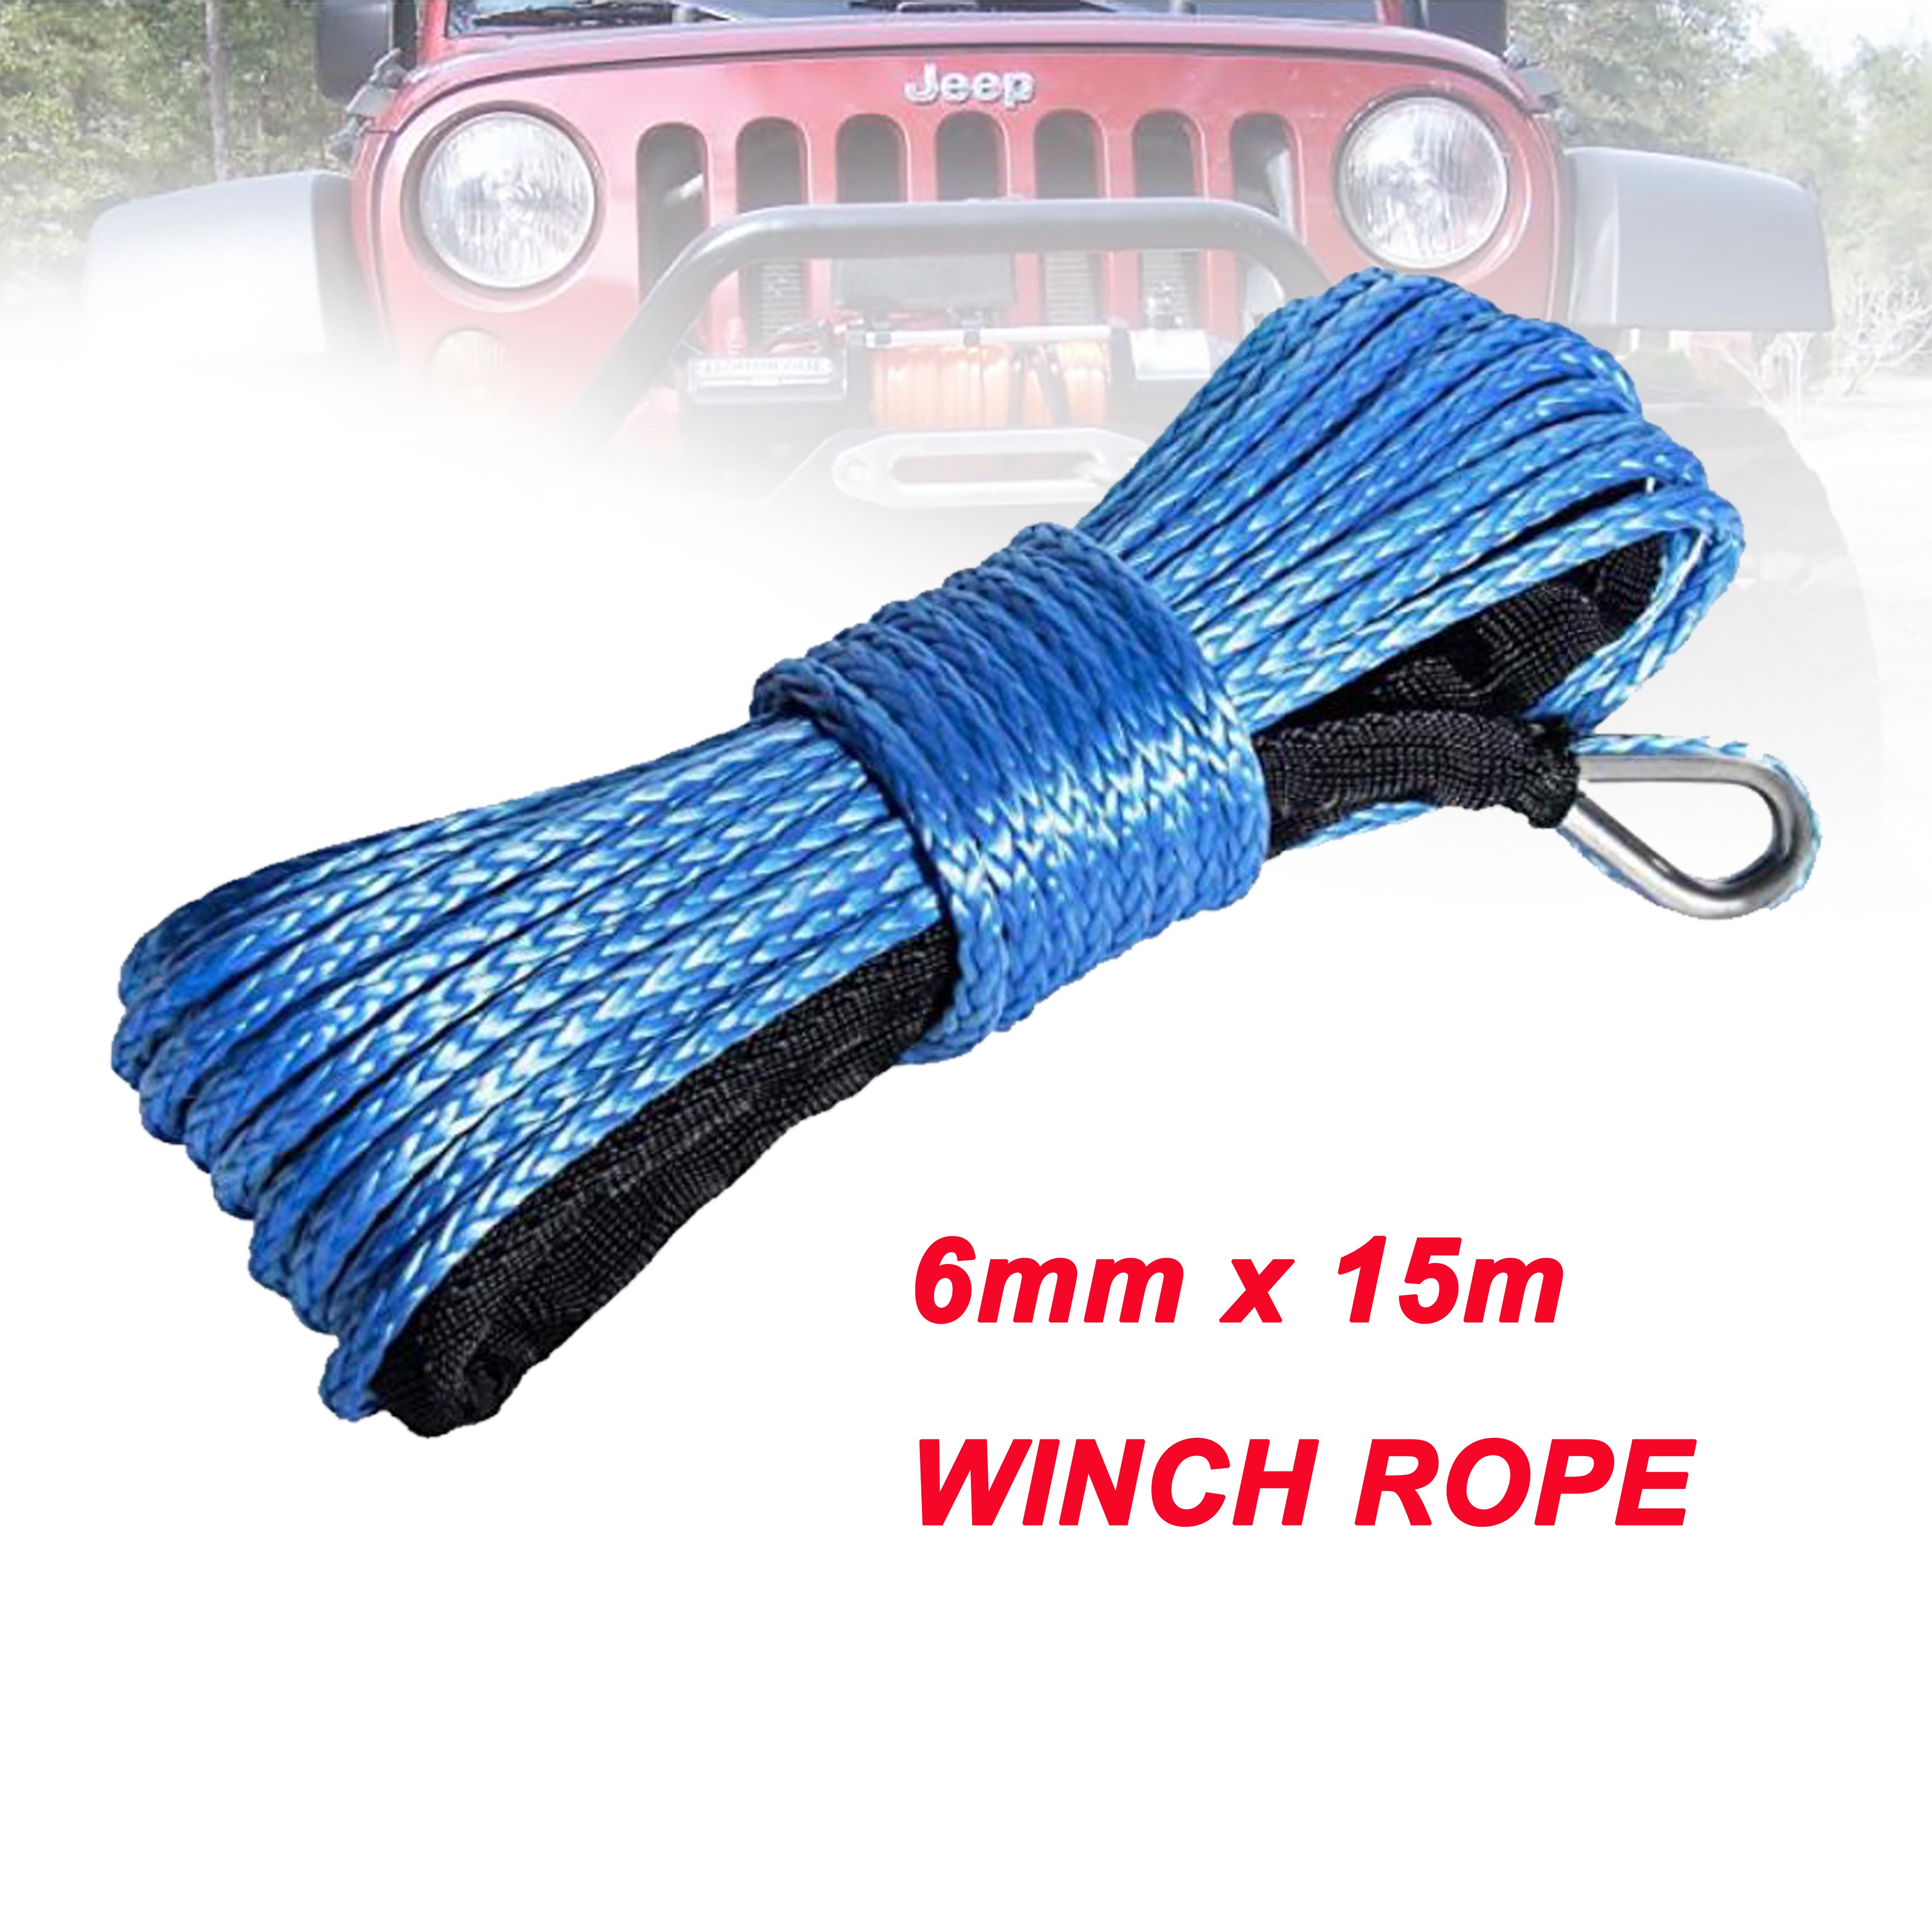 High quality 6mm x 15m plasma cable synthetic winch line uhmwpe rope with sheath car accessories